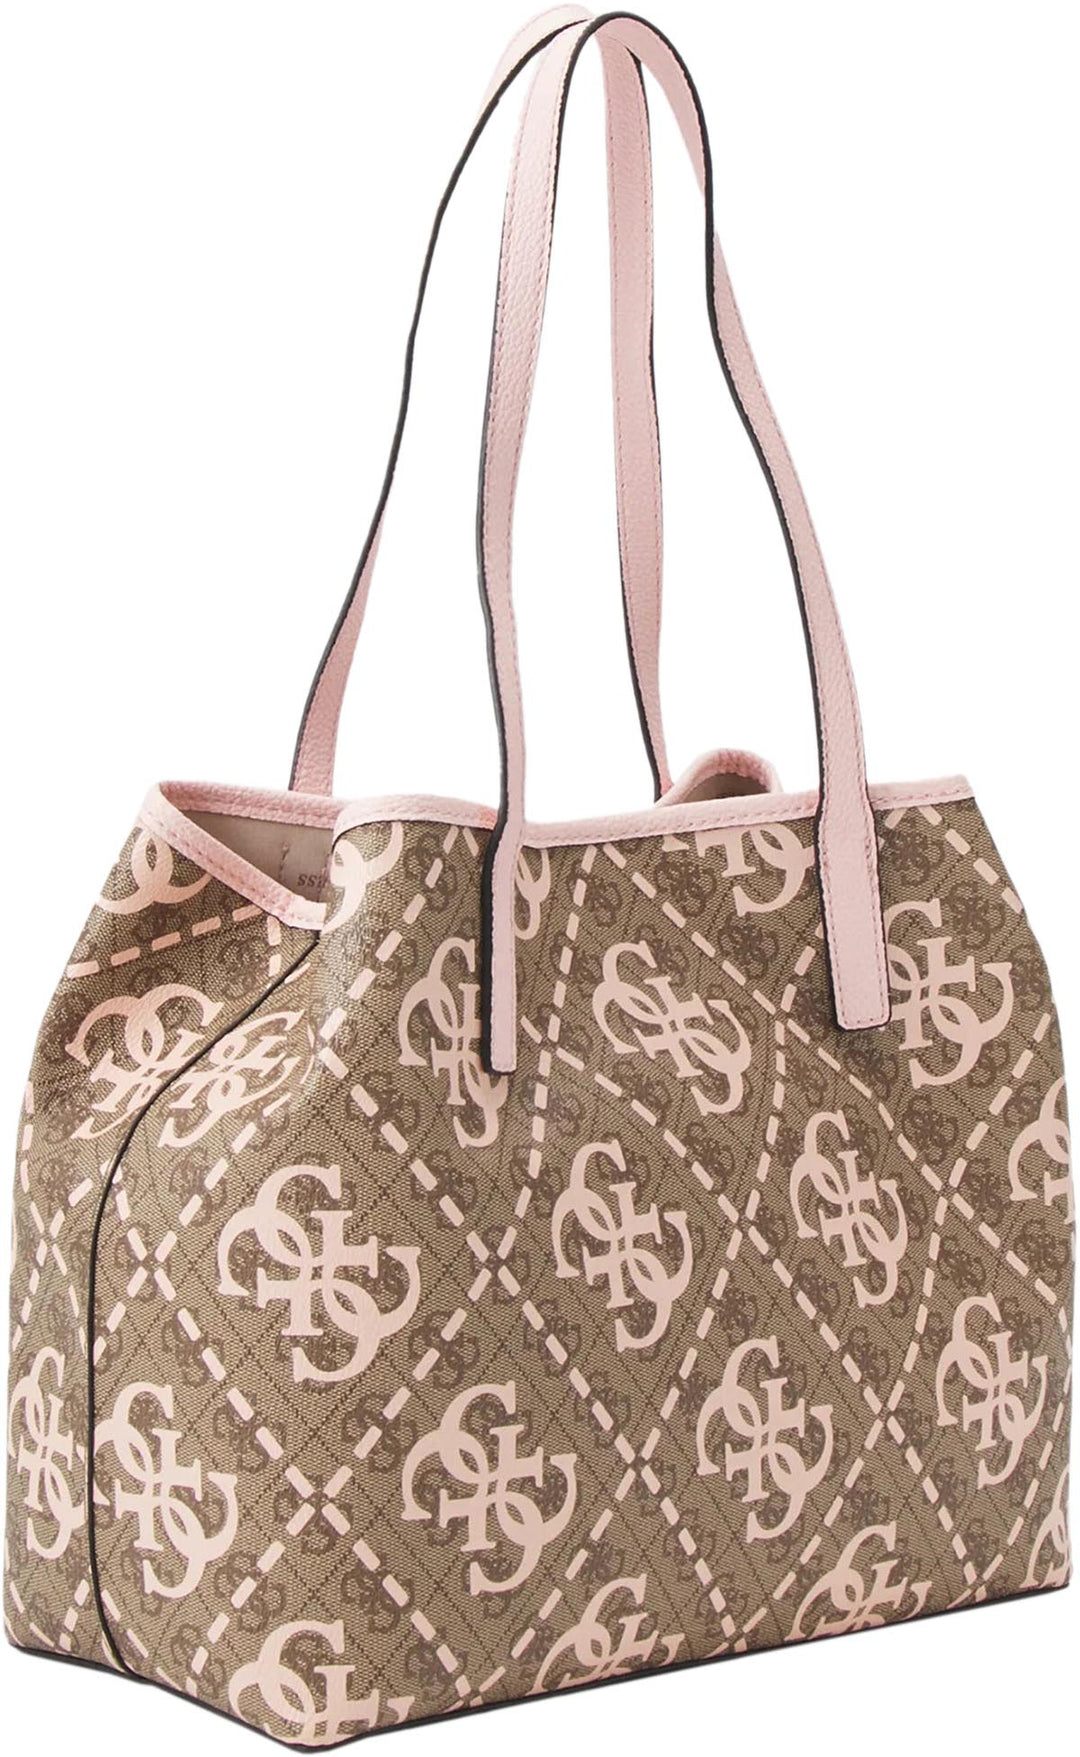 GUESS Vikky Large Tote